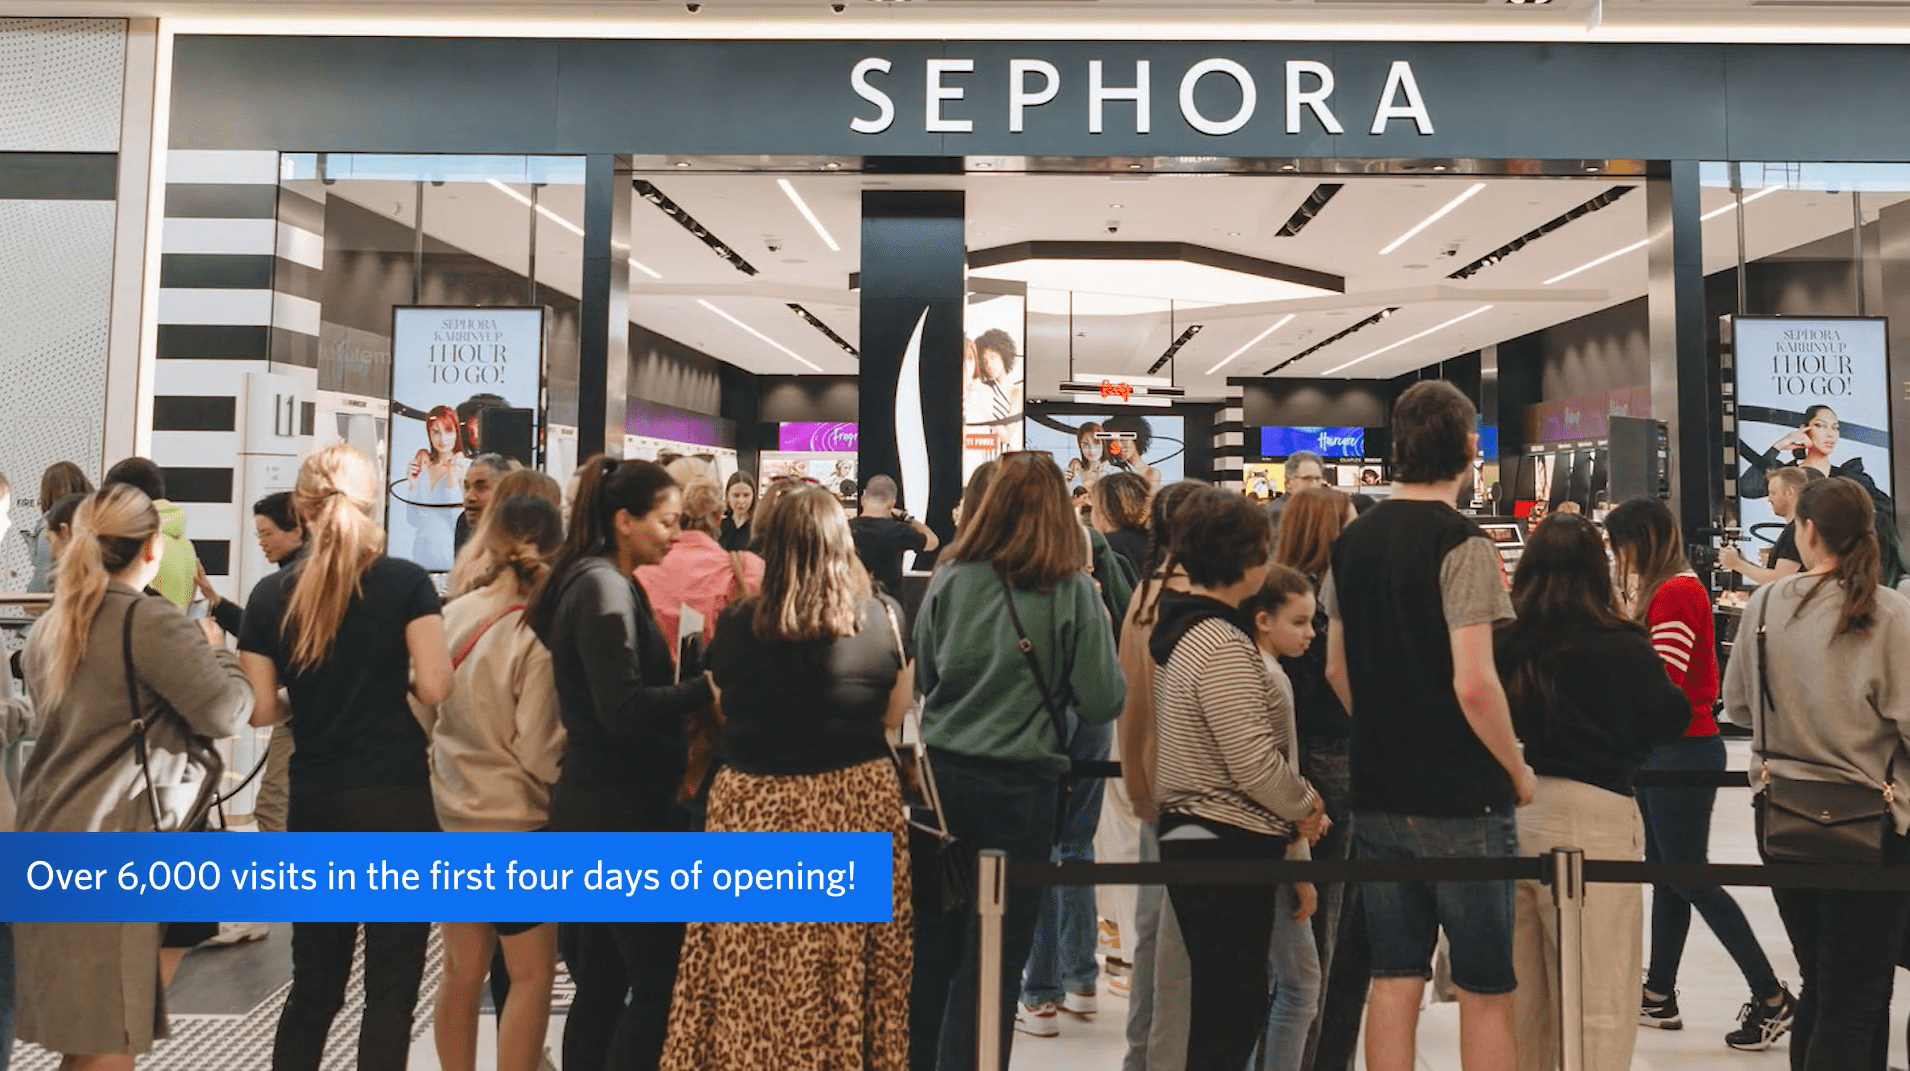 Chart 3: Image showing a crowd of people lining up outside the new Sephora store at Karrinyup Shopping Centre in Perth. The store had over 6,000 visits in the first four days of opening.